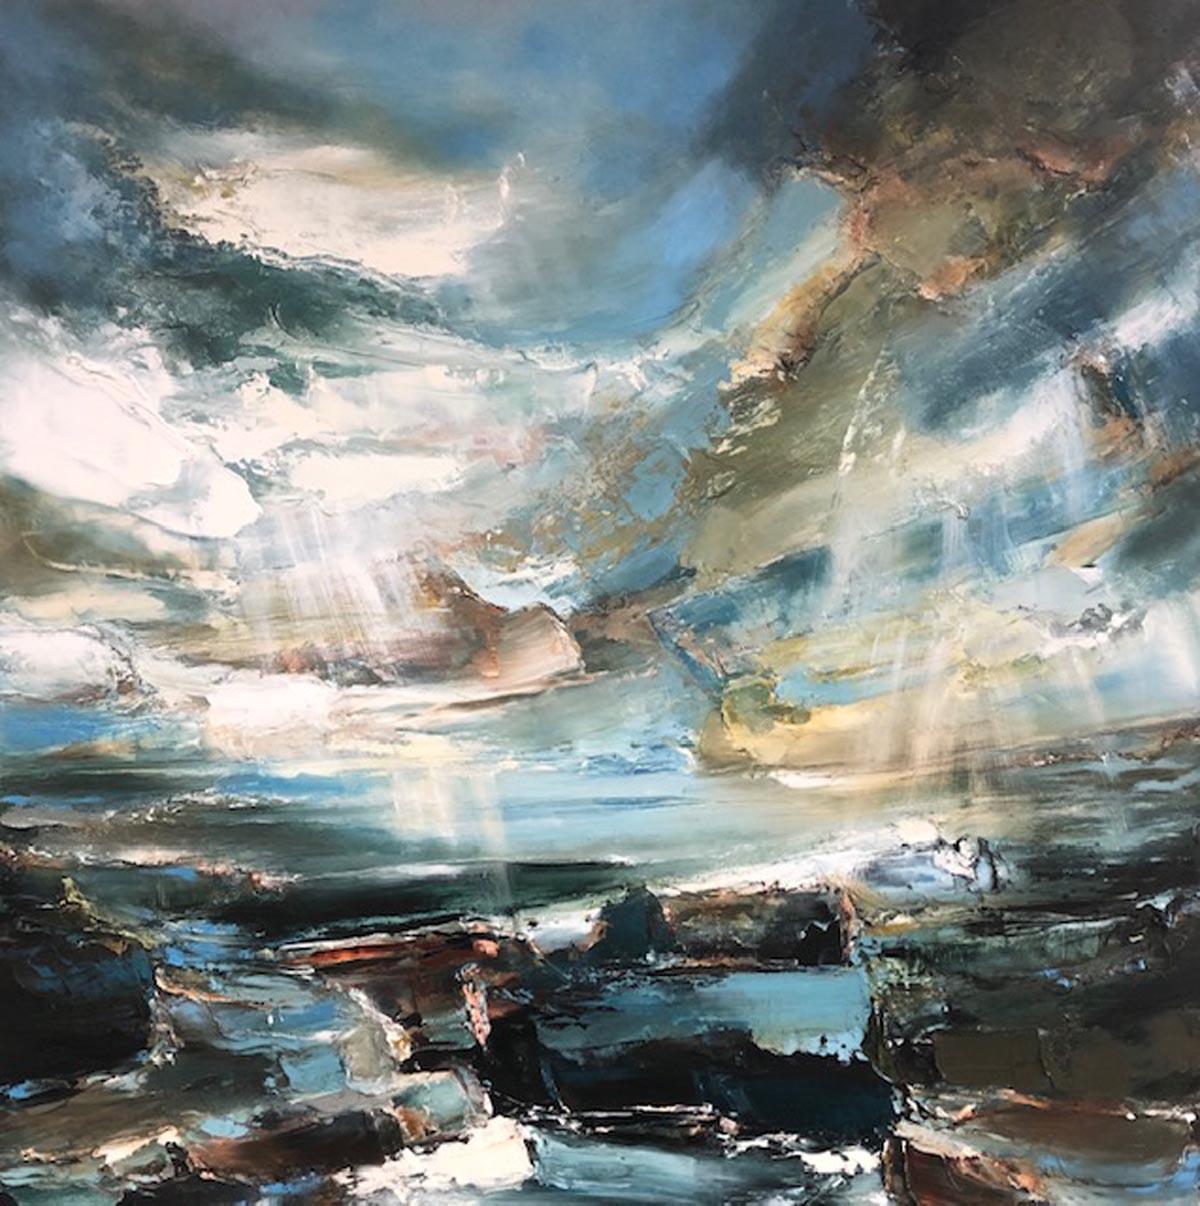 Helen Howells
Southerly
Original Oil Painting on Canvas
Oil Paint on Canvas
Canvas size: H 91cm x W 91cm x D 3.5cm
Sold Unframed
(Please note that in situ images are purely an indication of how a piece may look.)

Southerly is an original seascape